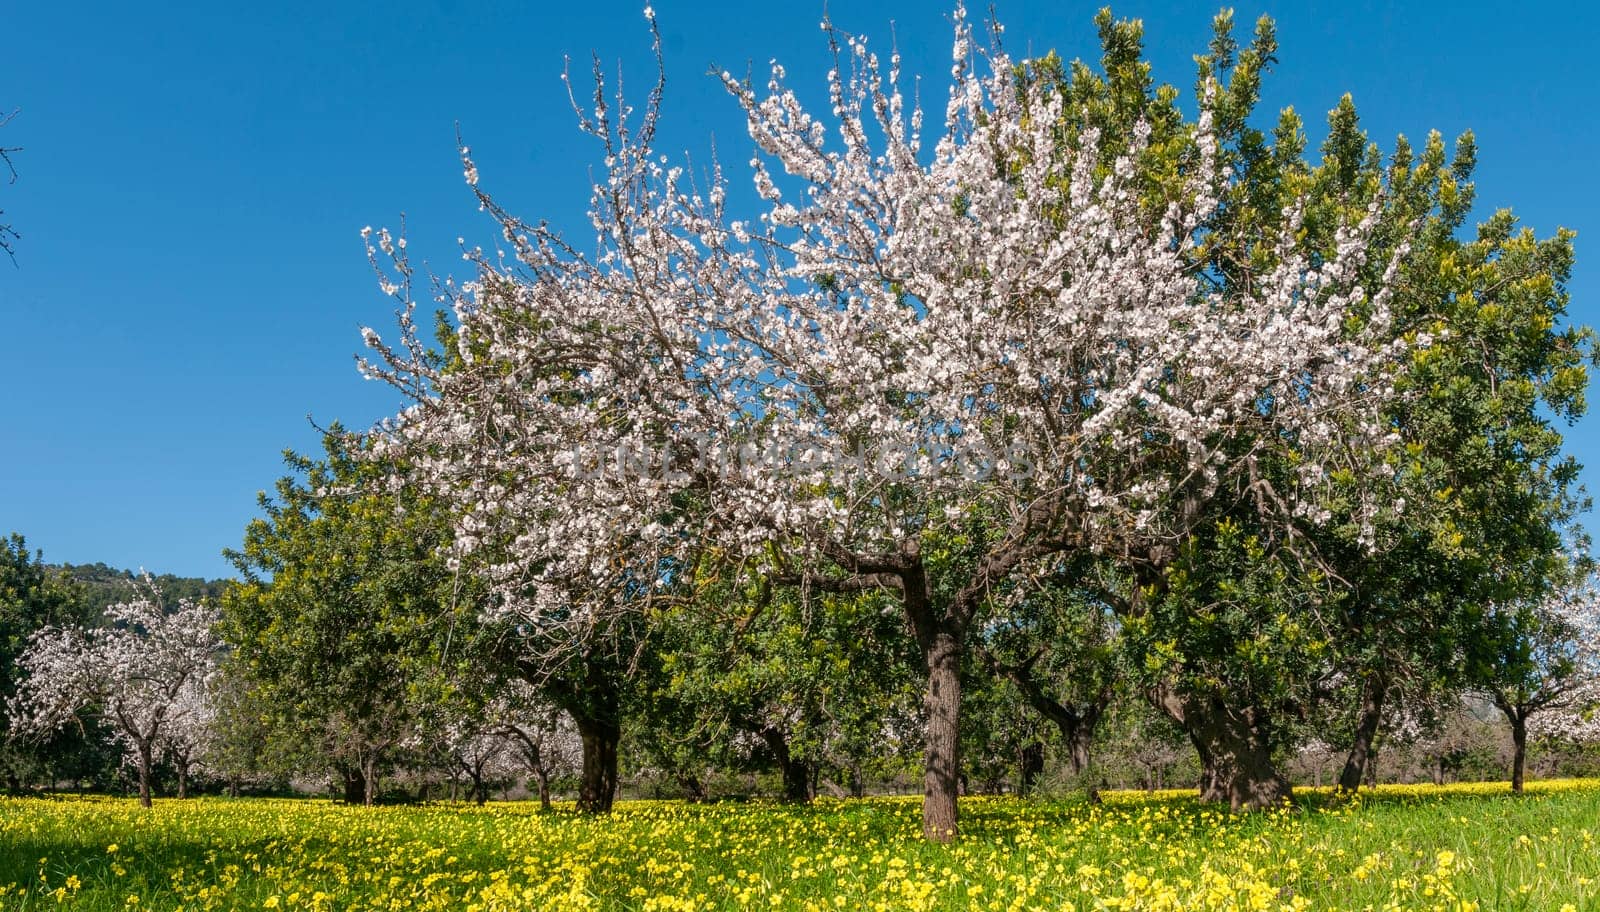 Blossom-laden fruit trees amidst a vibrant carpet of yellow wildflowers under a deep blue sky